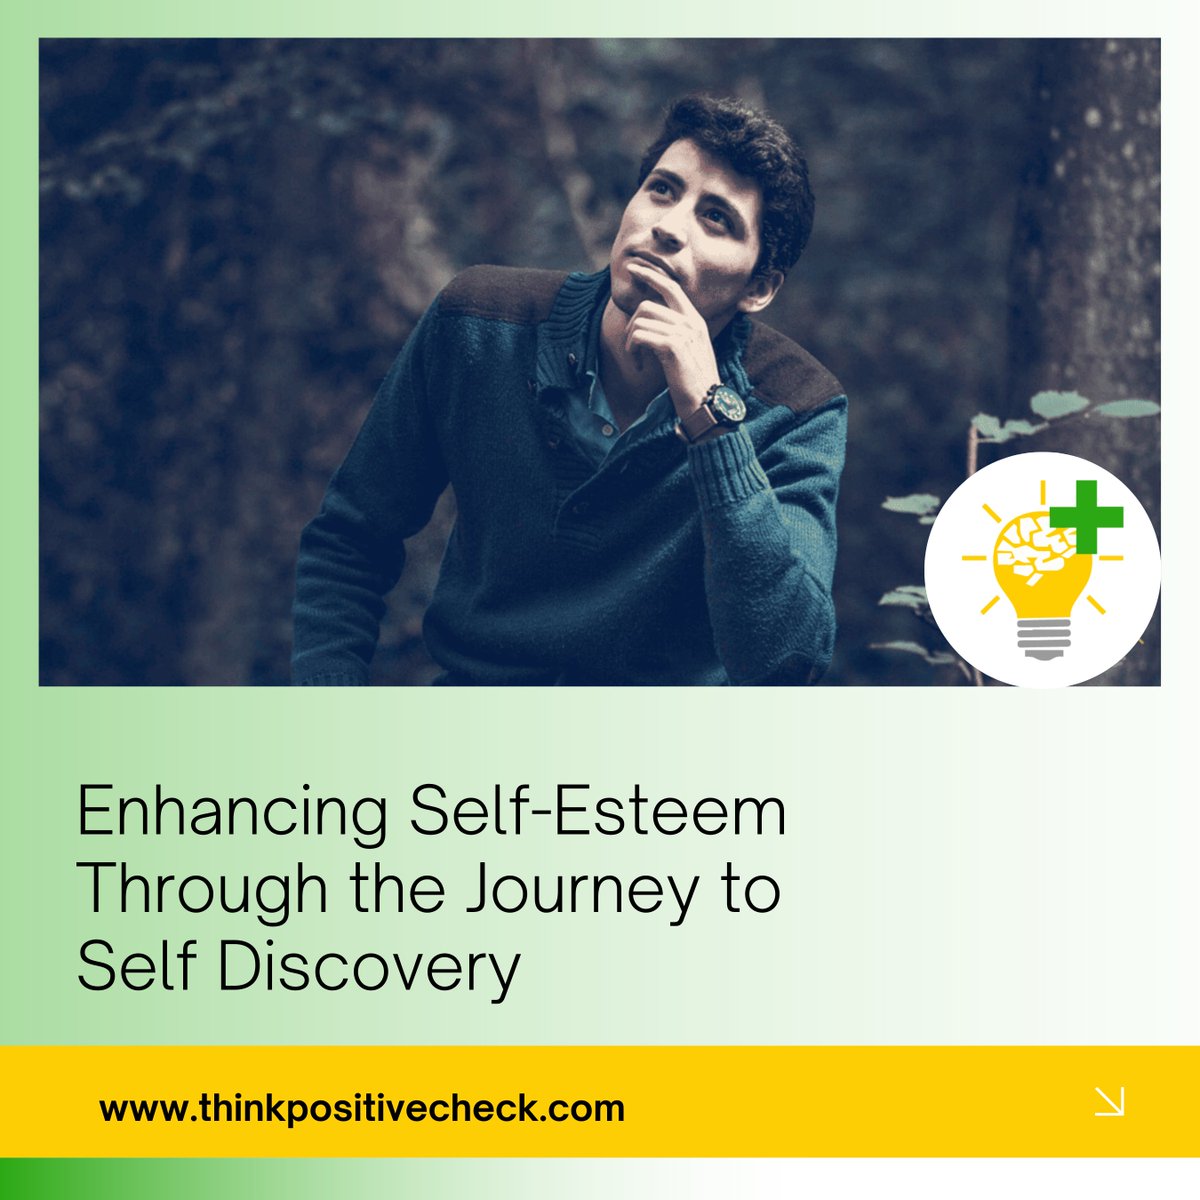 ✨Read the full article:'Enhancing Self Esteem Through the Journey to Self Discovery 

🌐 buff.ly/3CgK98S

#thinkpositivecheck #positivevibestribe #spirituallifestyle #happyeveryday #positivemotivation #inspiration #inspirationalquotes #success #mindset #believe